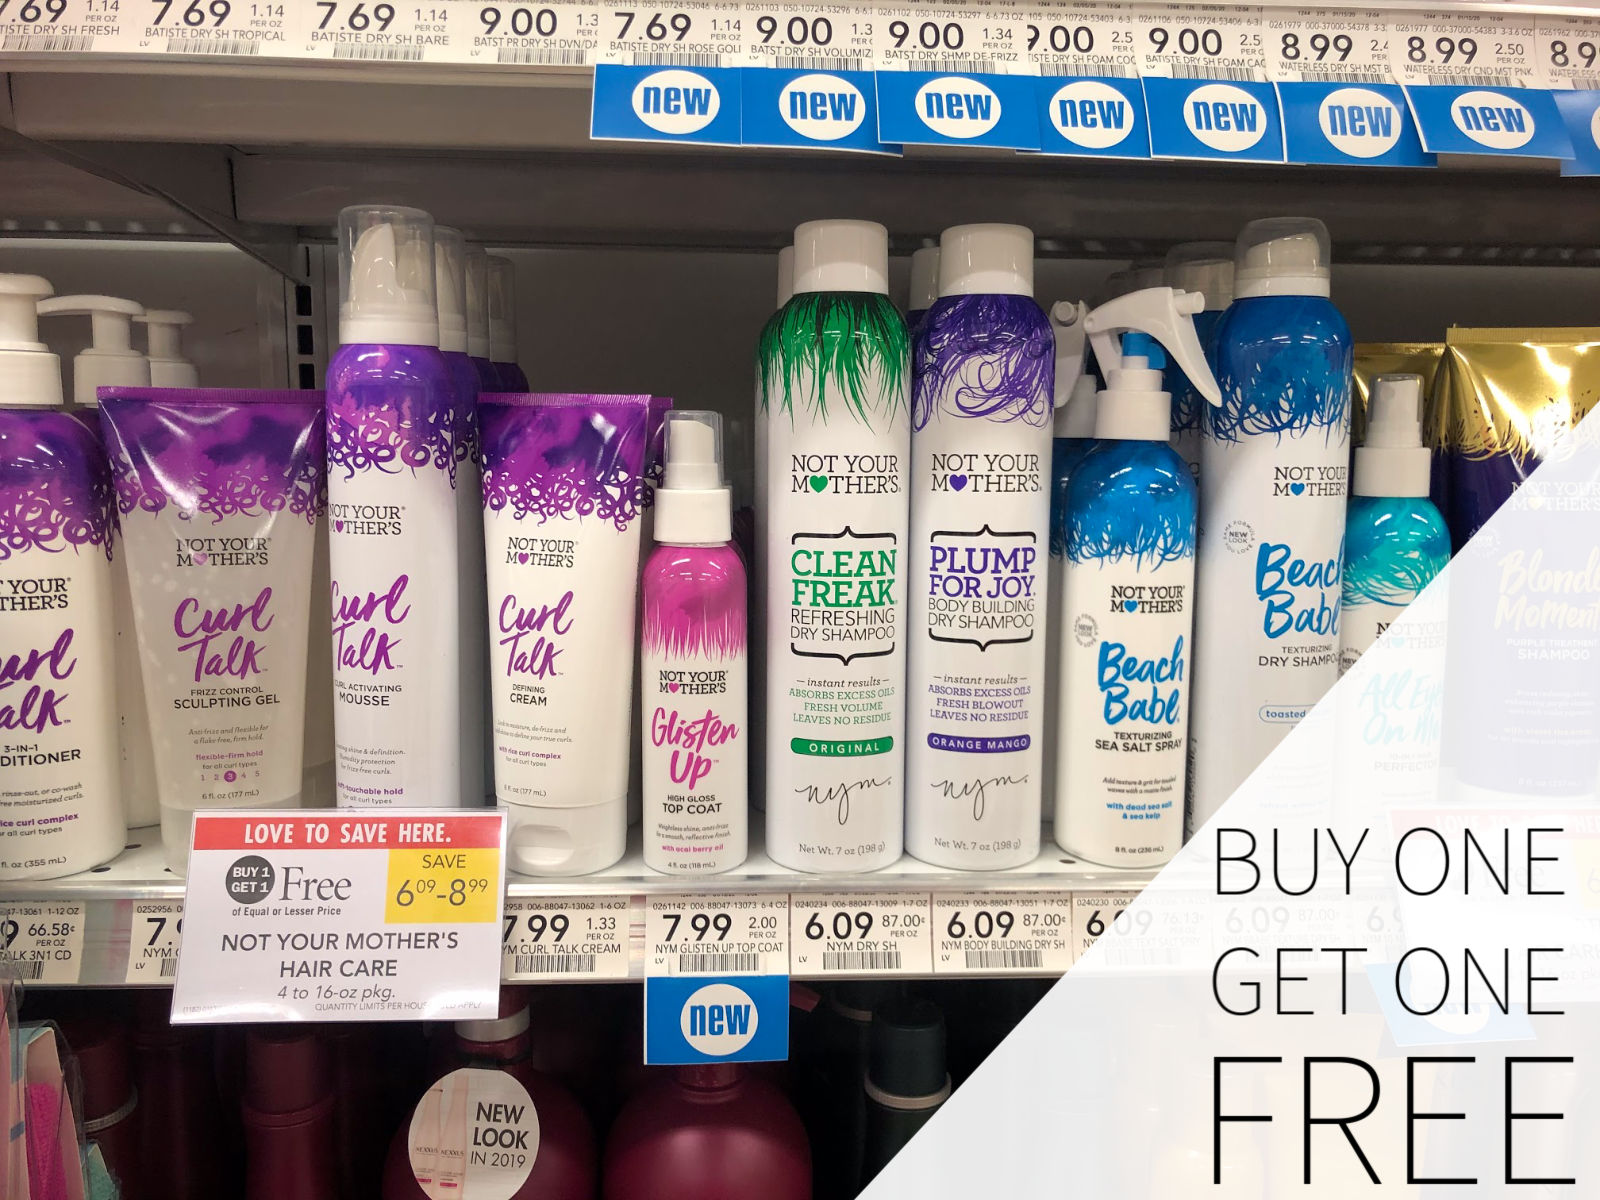 Not Your Mother's Products Are Buy One, Get One FREE At Publix! on I Heart Publix